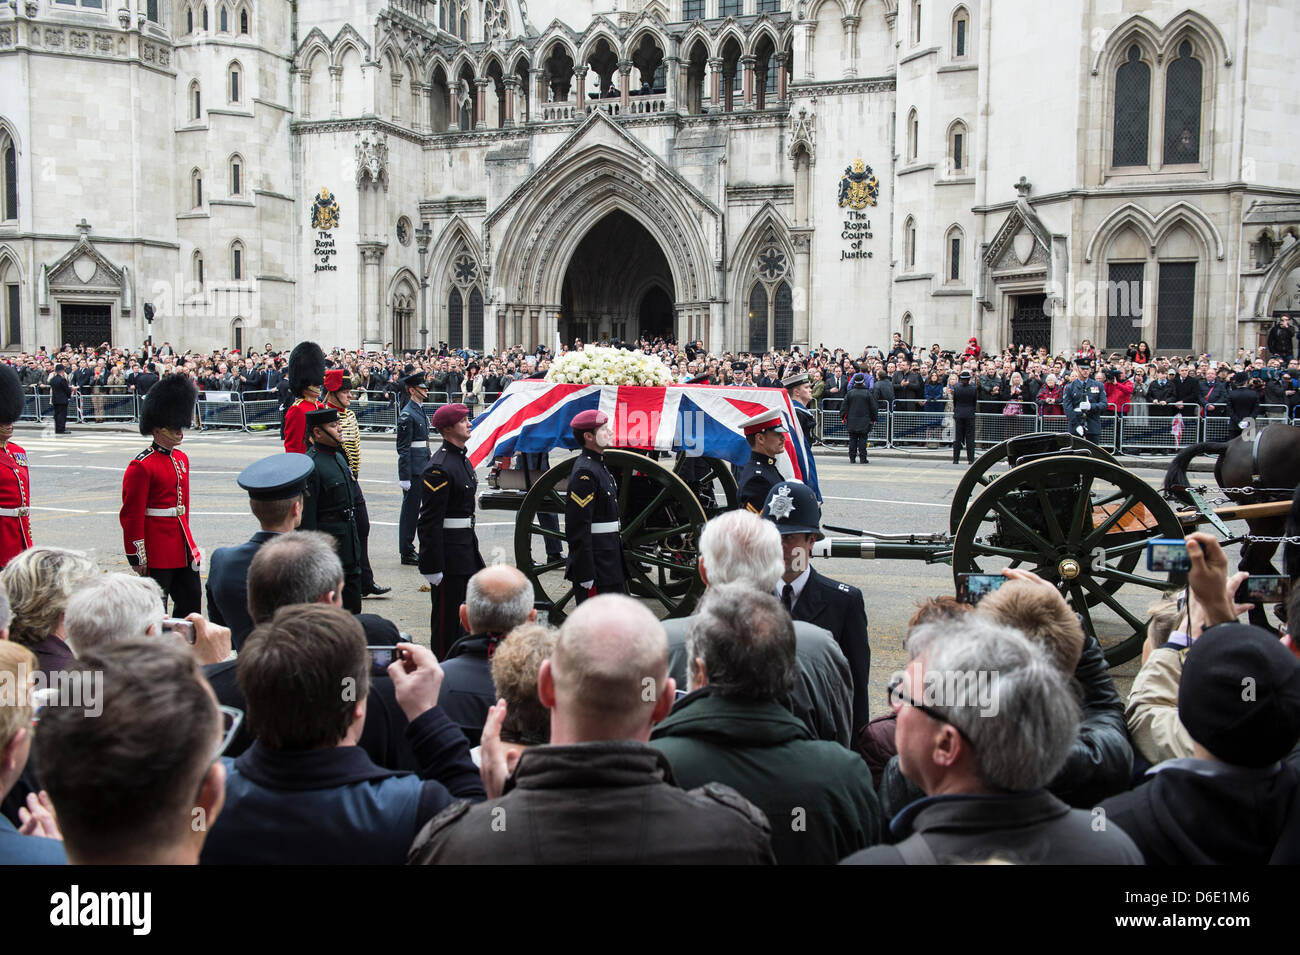 London, UK. 17th April 2013. Lady Thatcher’s coffin passes along The Strand on a gun carriage en-route to St. Paul’s Cathederal for a State Funeral. The fact that Lady Thatcher has been given a State Funeral and from the public purse has lead to fierce debate both in and out of Parliament. Credit:  Allsorts Stock Photo/Alamy Live News Stock Photo